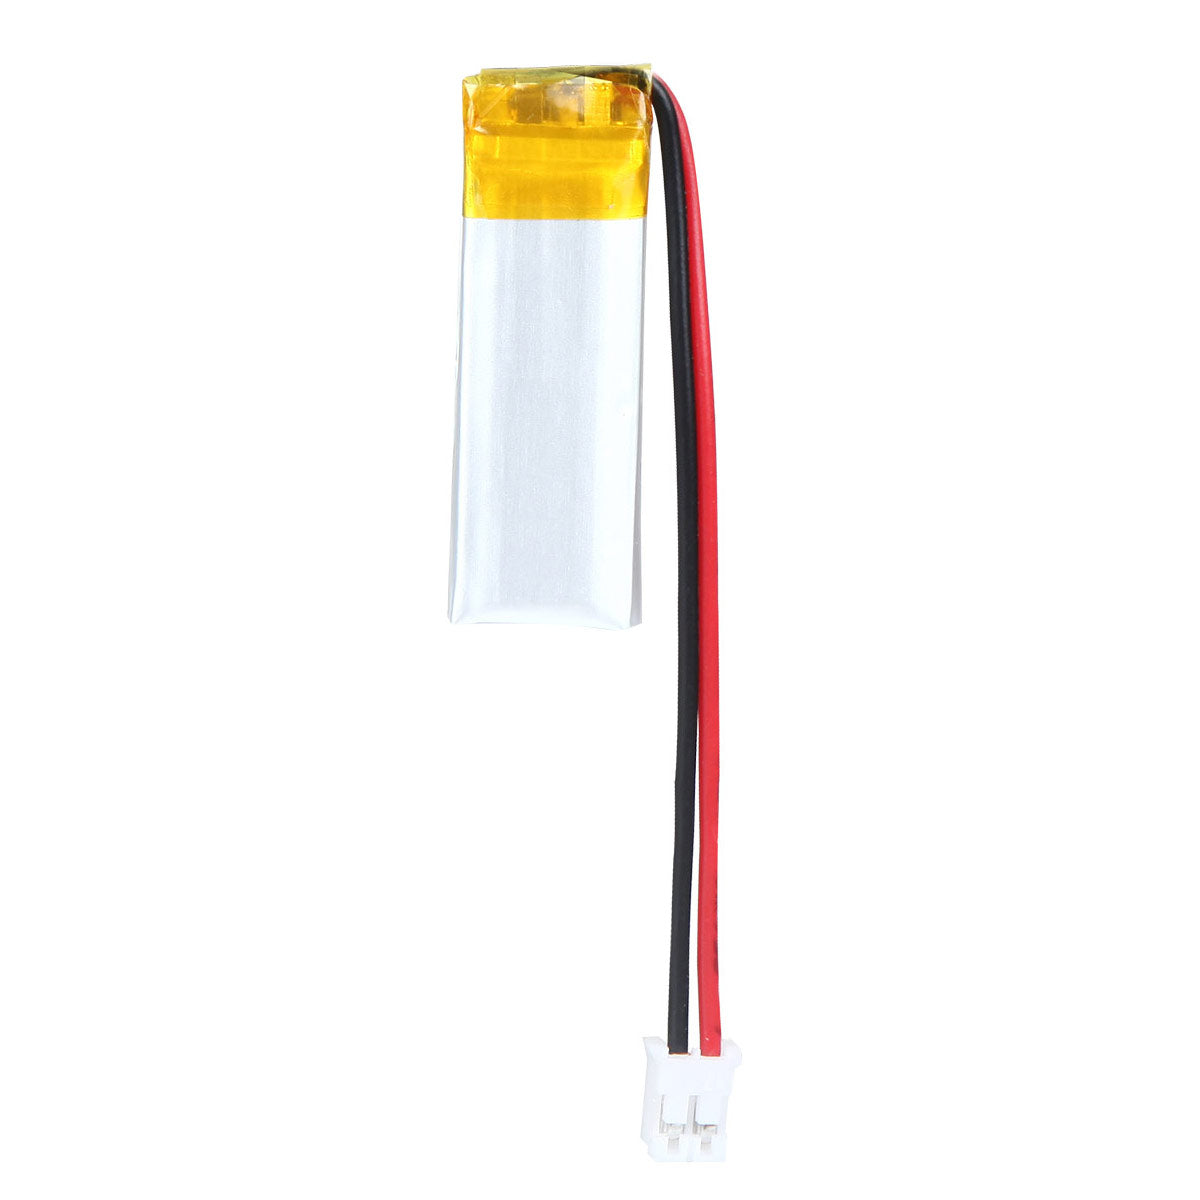 YDL 3.7V 100mAh 401230 Rechargeable Lithium Polymer Battery Length 32mm